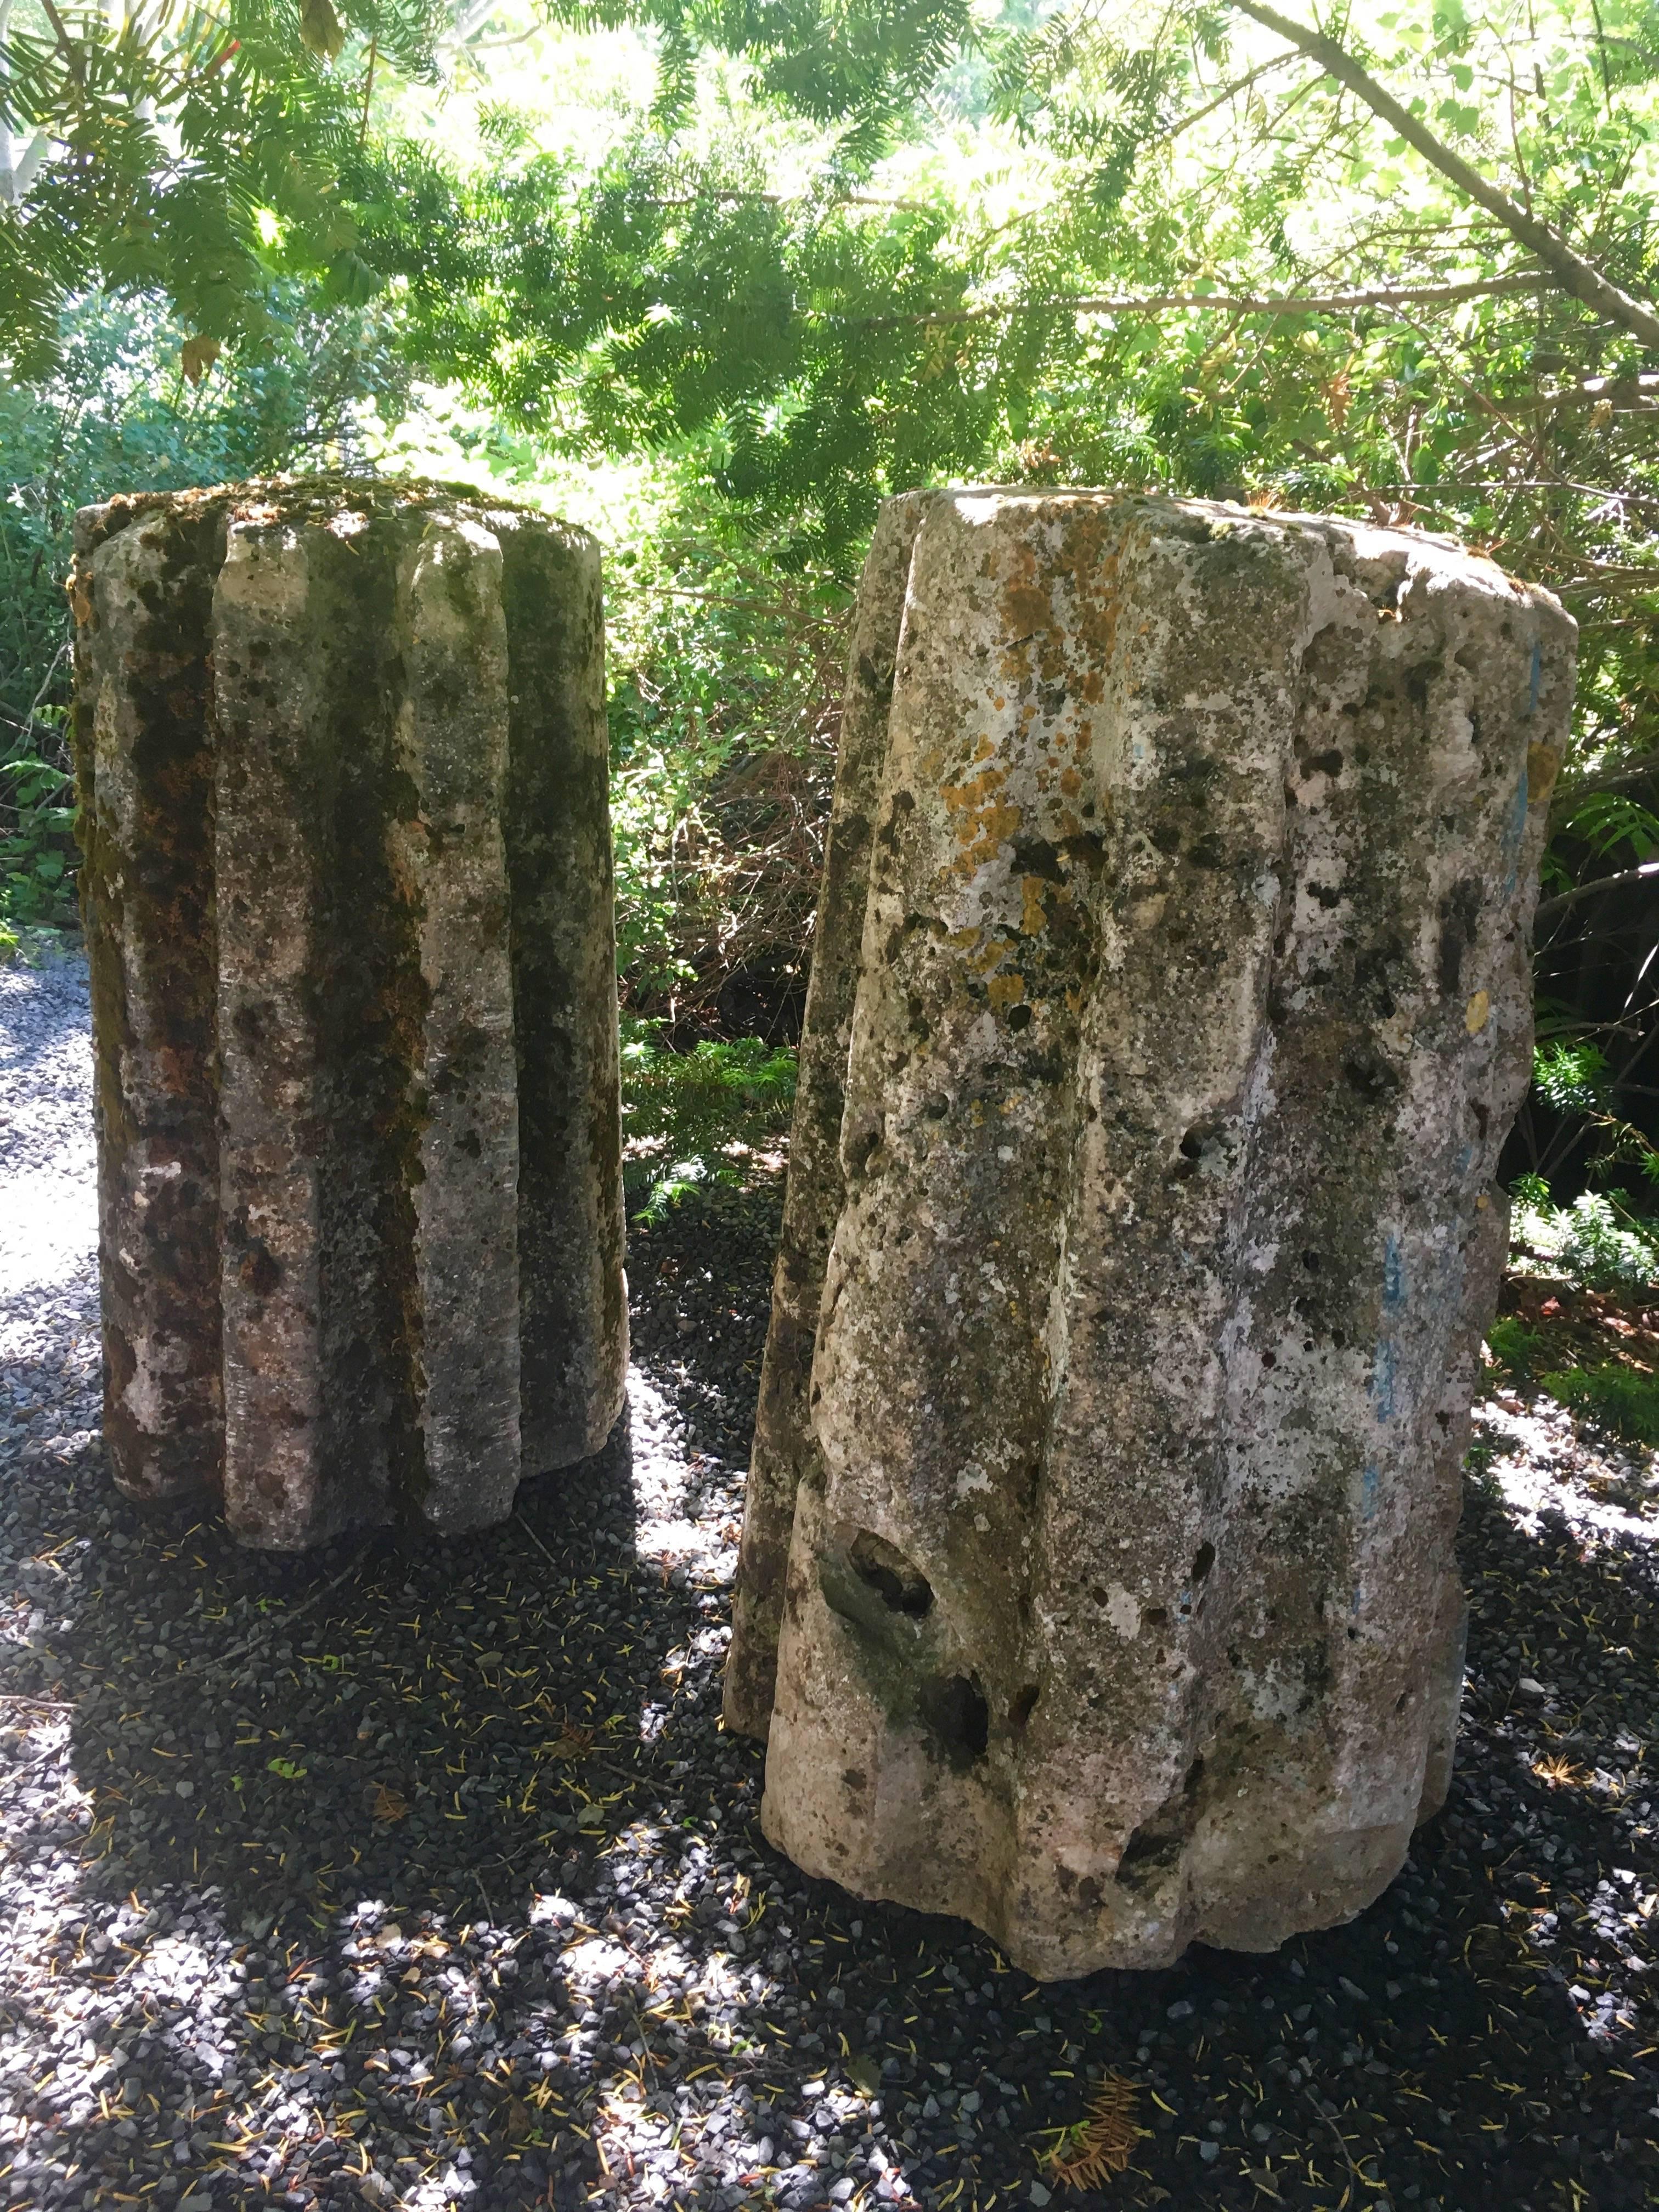 This fabulous and elegant pair of hand-carved limestone "cannelles" were originally used to grind wheat in the 18th century and are named "cannelles" after the same-shaped little cinnamon cakes made famous by Bordeaux